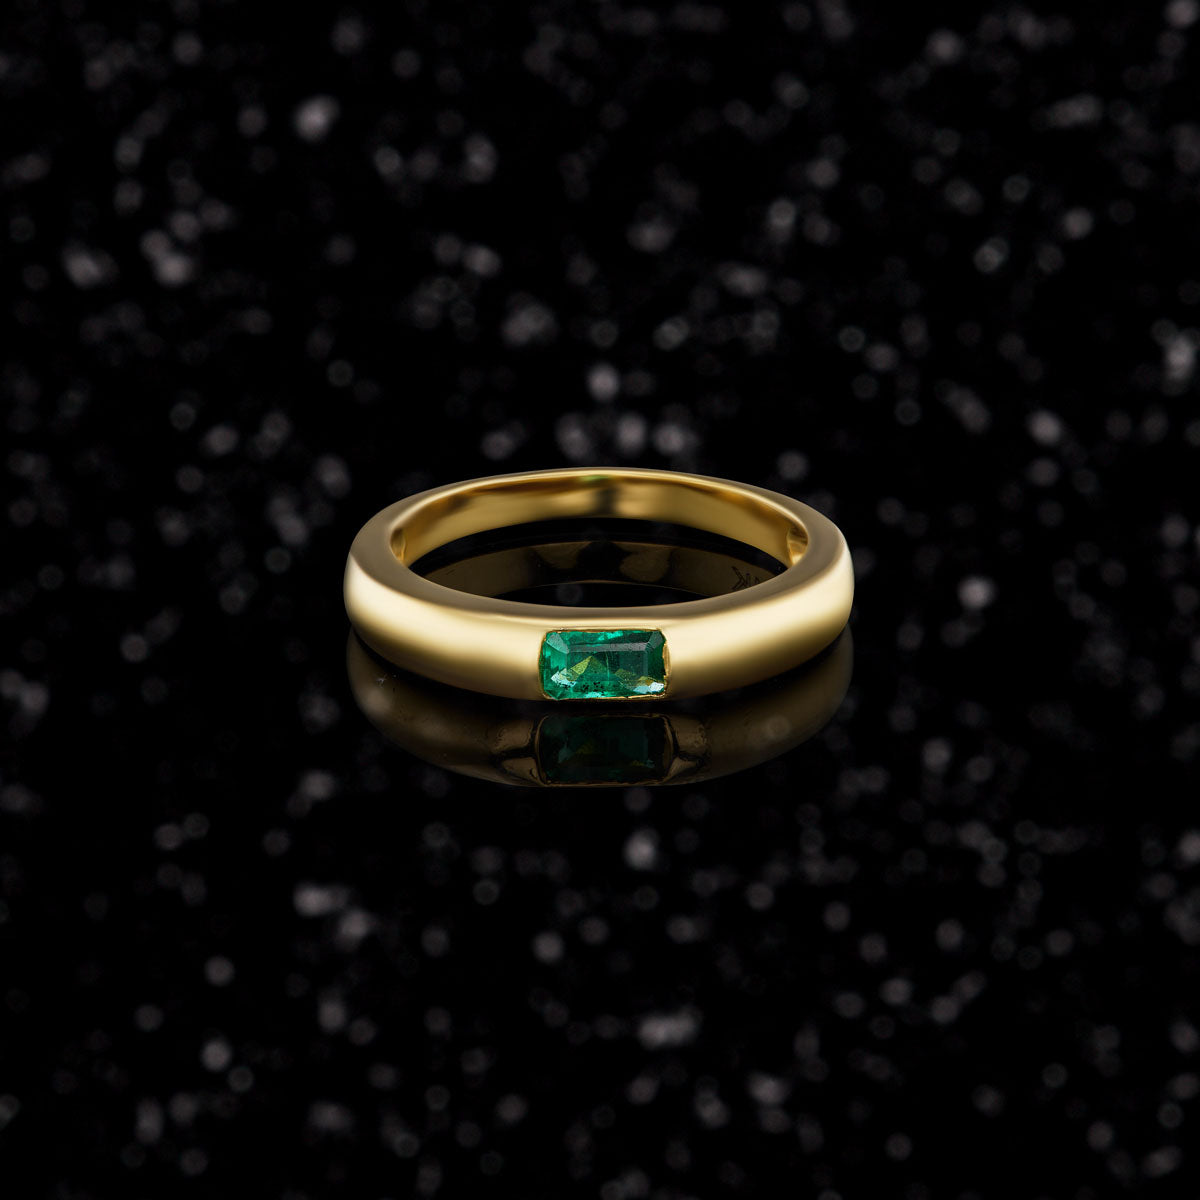 THE EMERALD STACKING RING